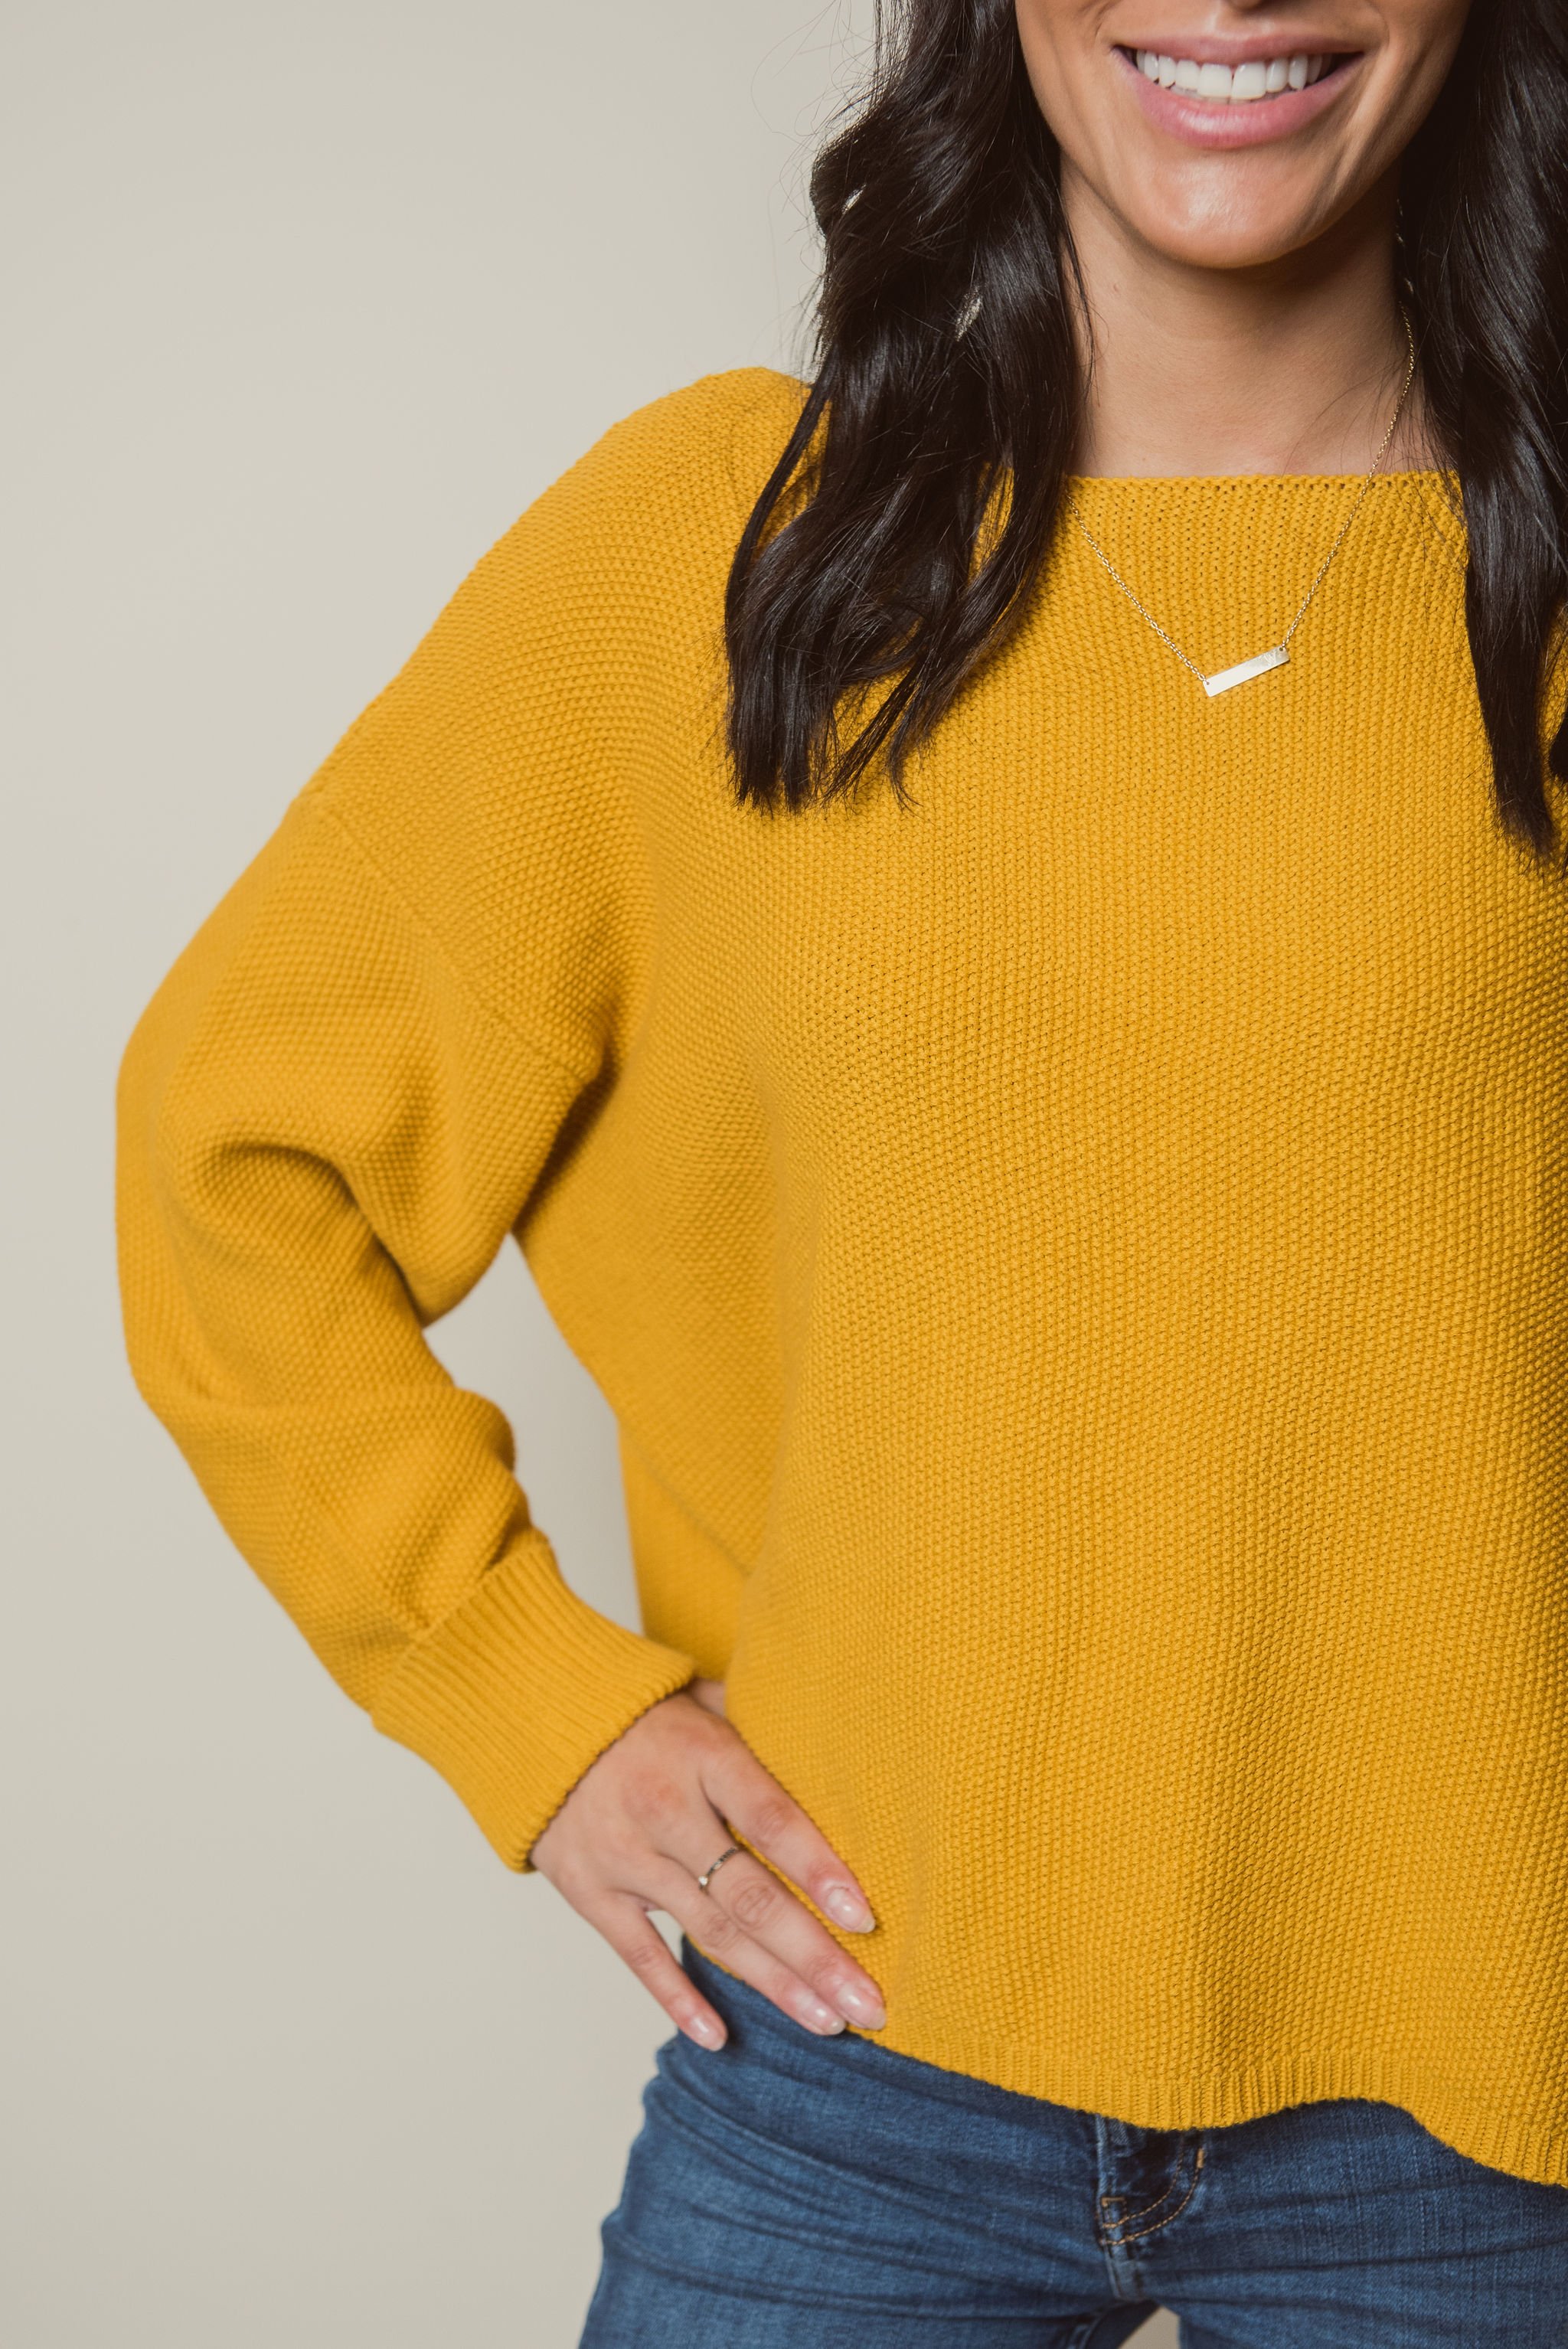 Unfoldid stylist in yellow sweater for Thanksgiving